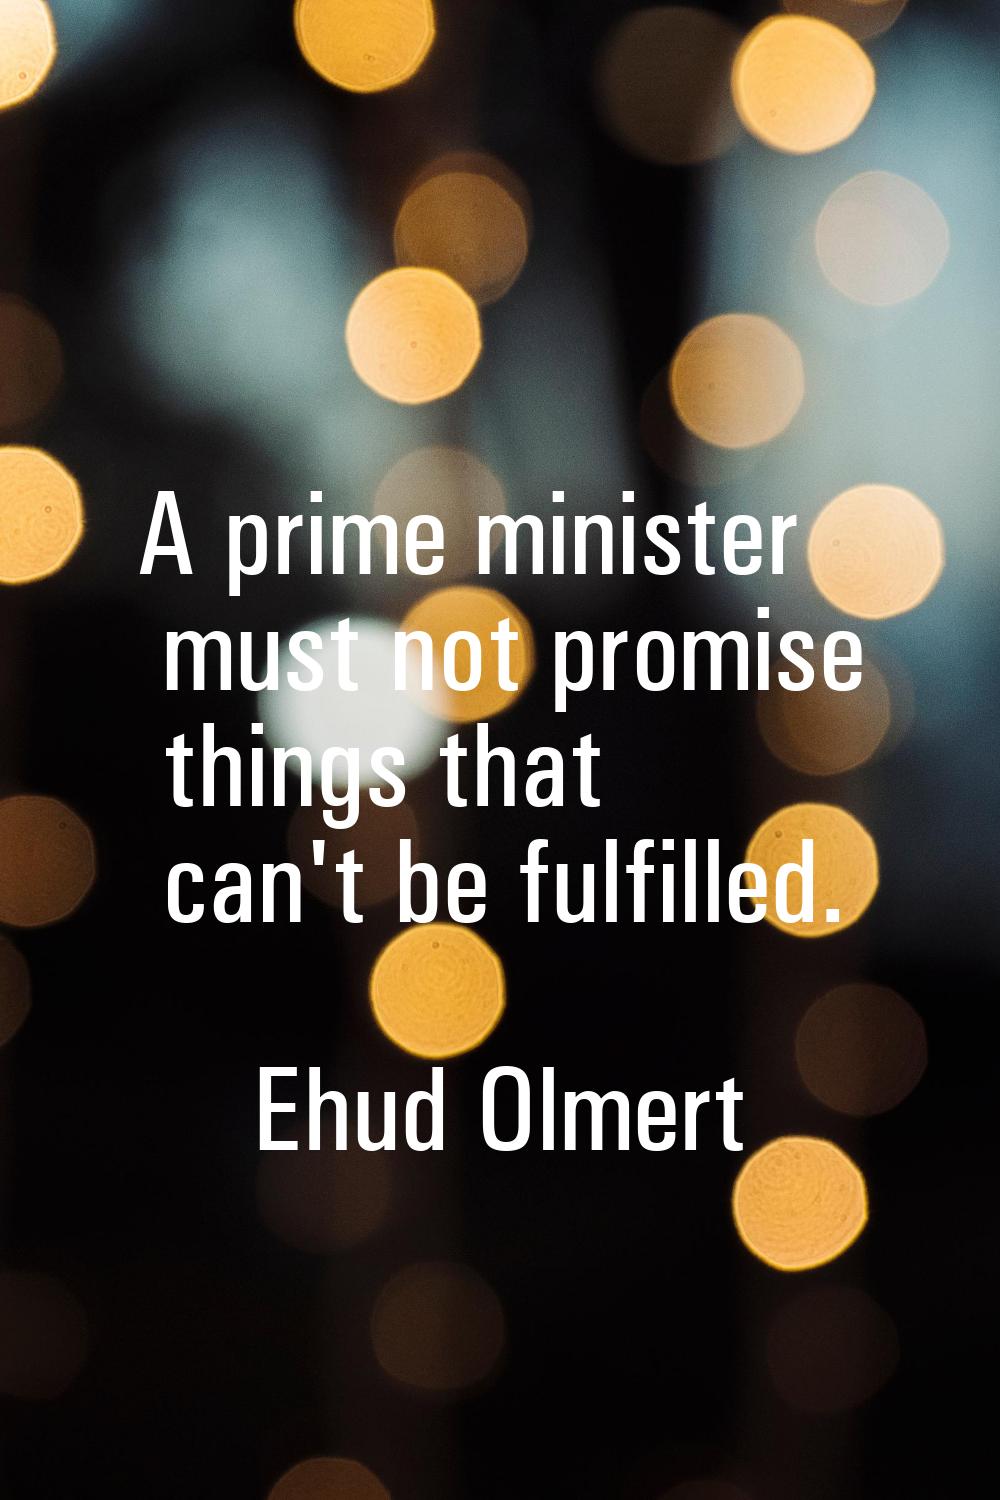 A prime minister must not promise things that can't be fulfilled.